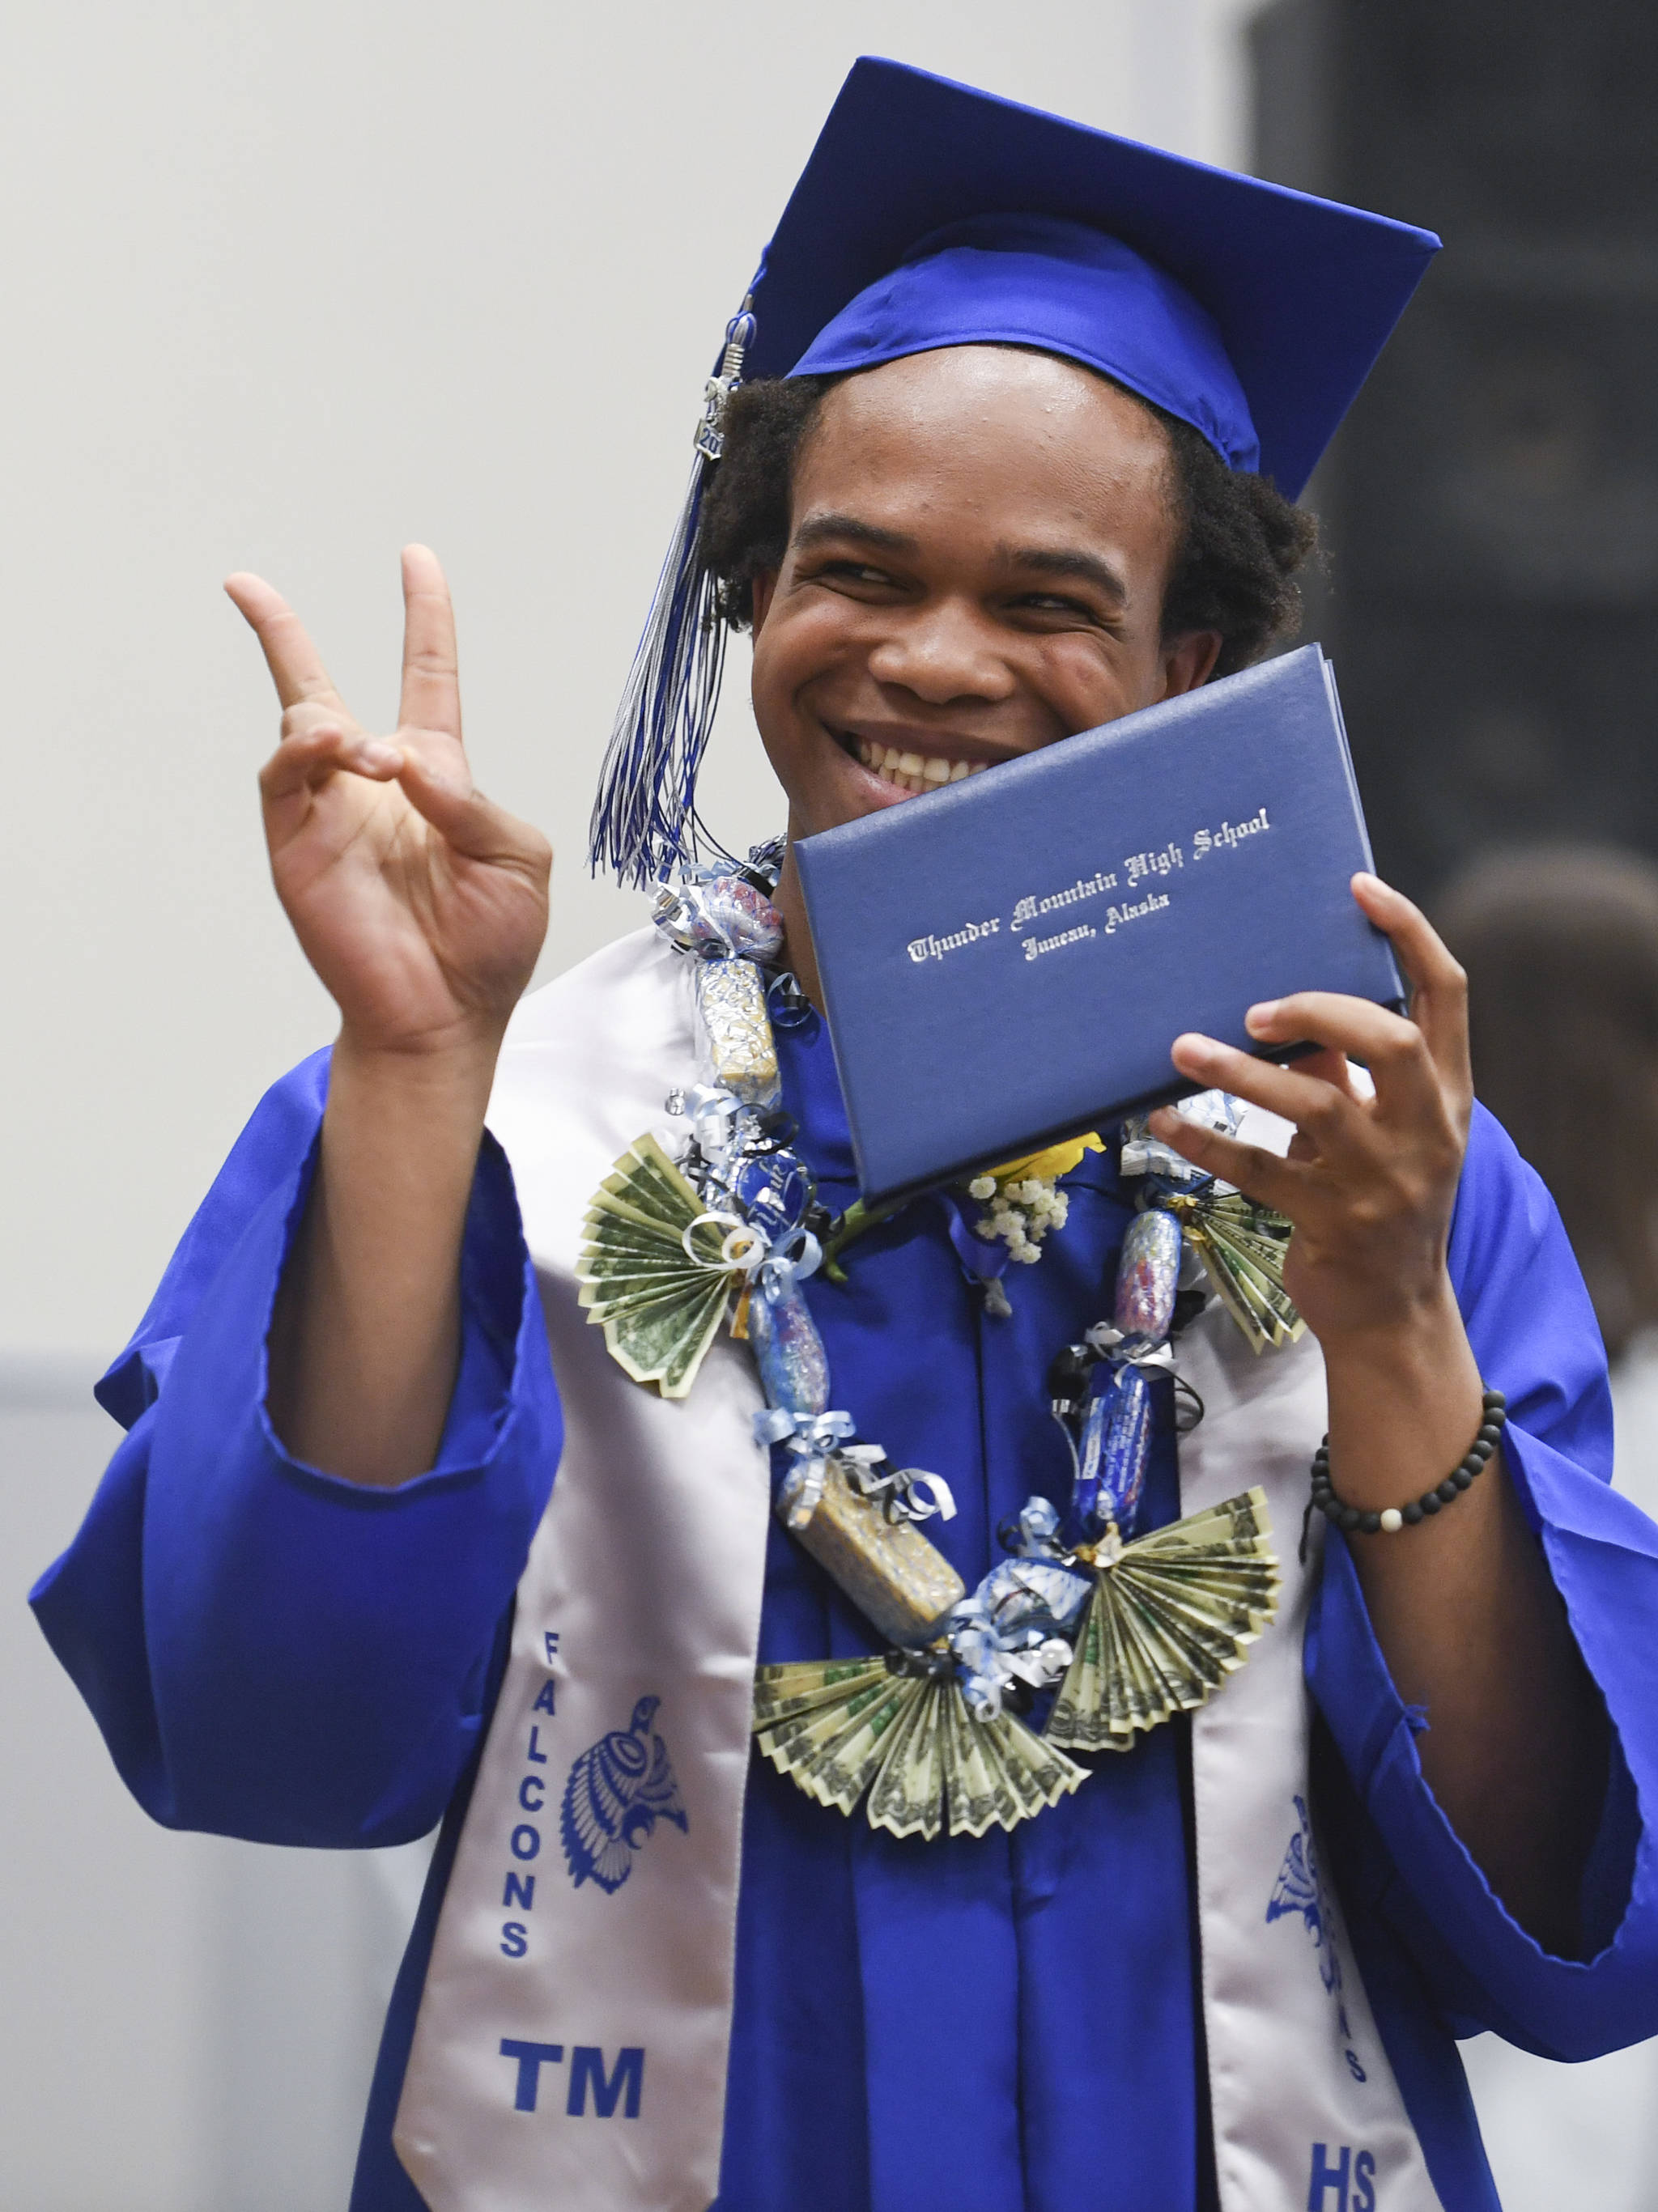 Simon Smith shows off his new diploma while walking off stage during the Thunder Mountain High School graduation on Sunday, May 26, 2019. (Michael Penn | Juneau Empire)